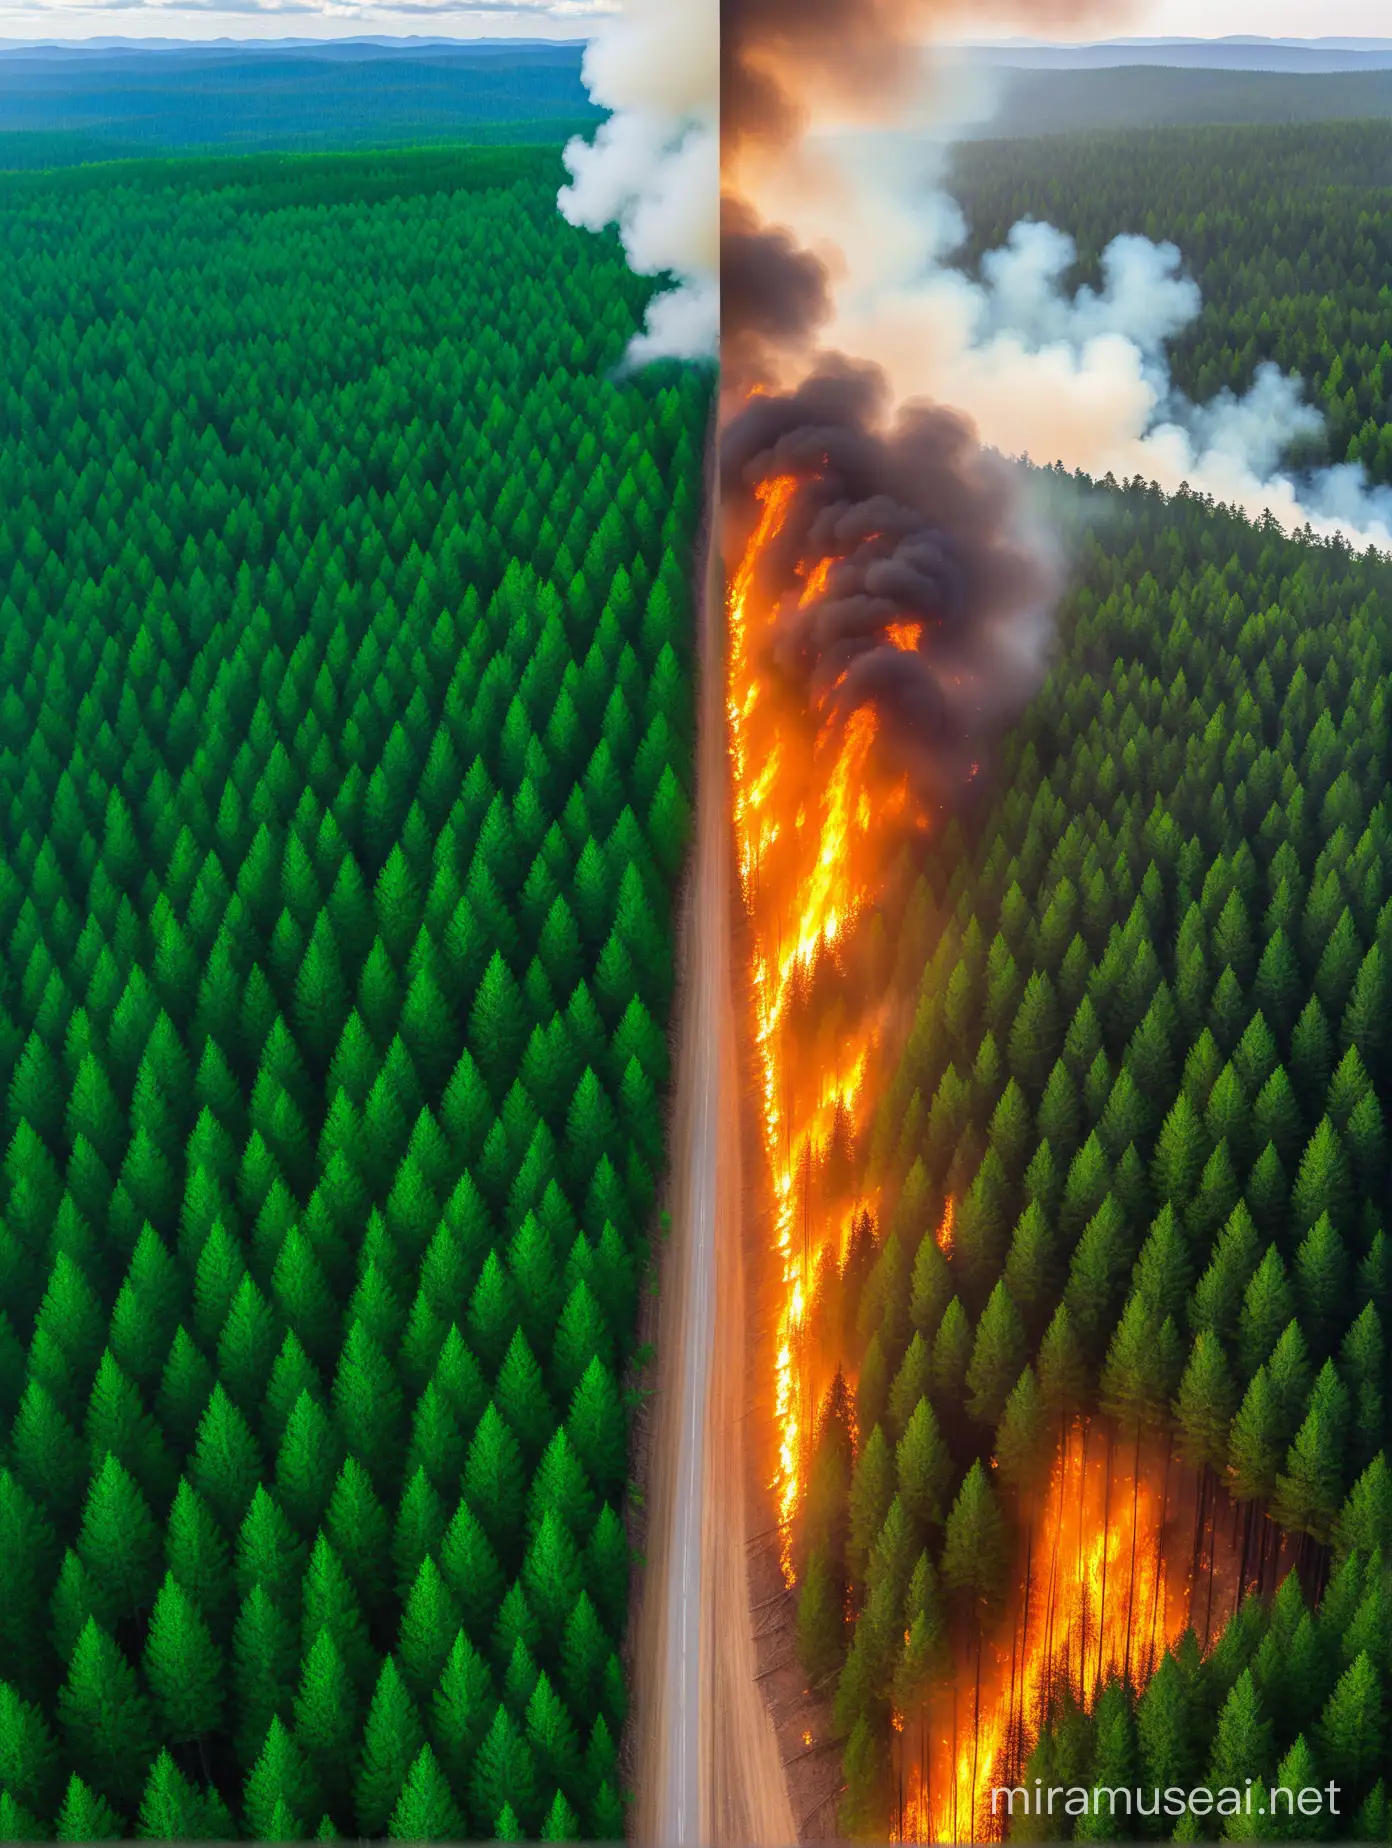 On the left side, there is a forest that is burning, while on the right side, there is a lush green forest.